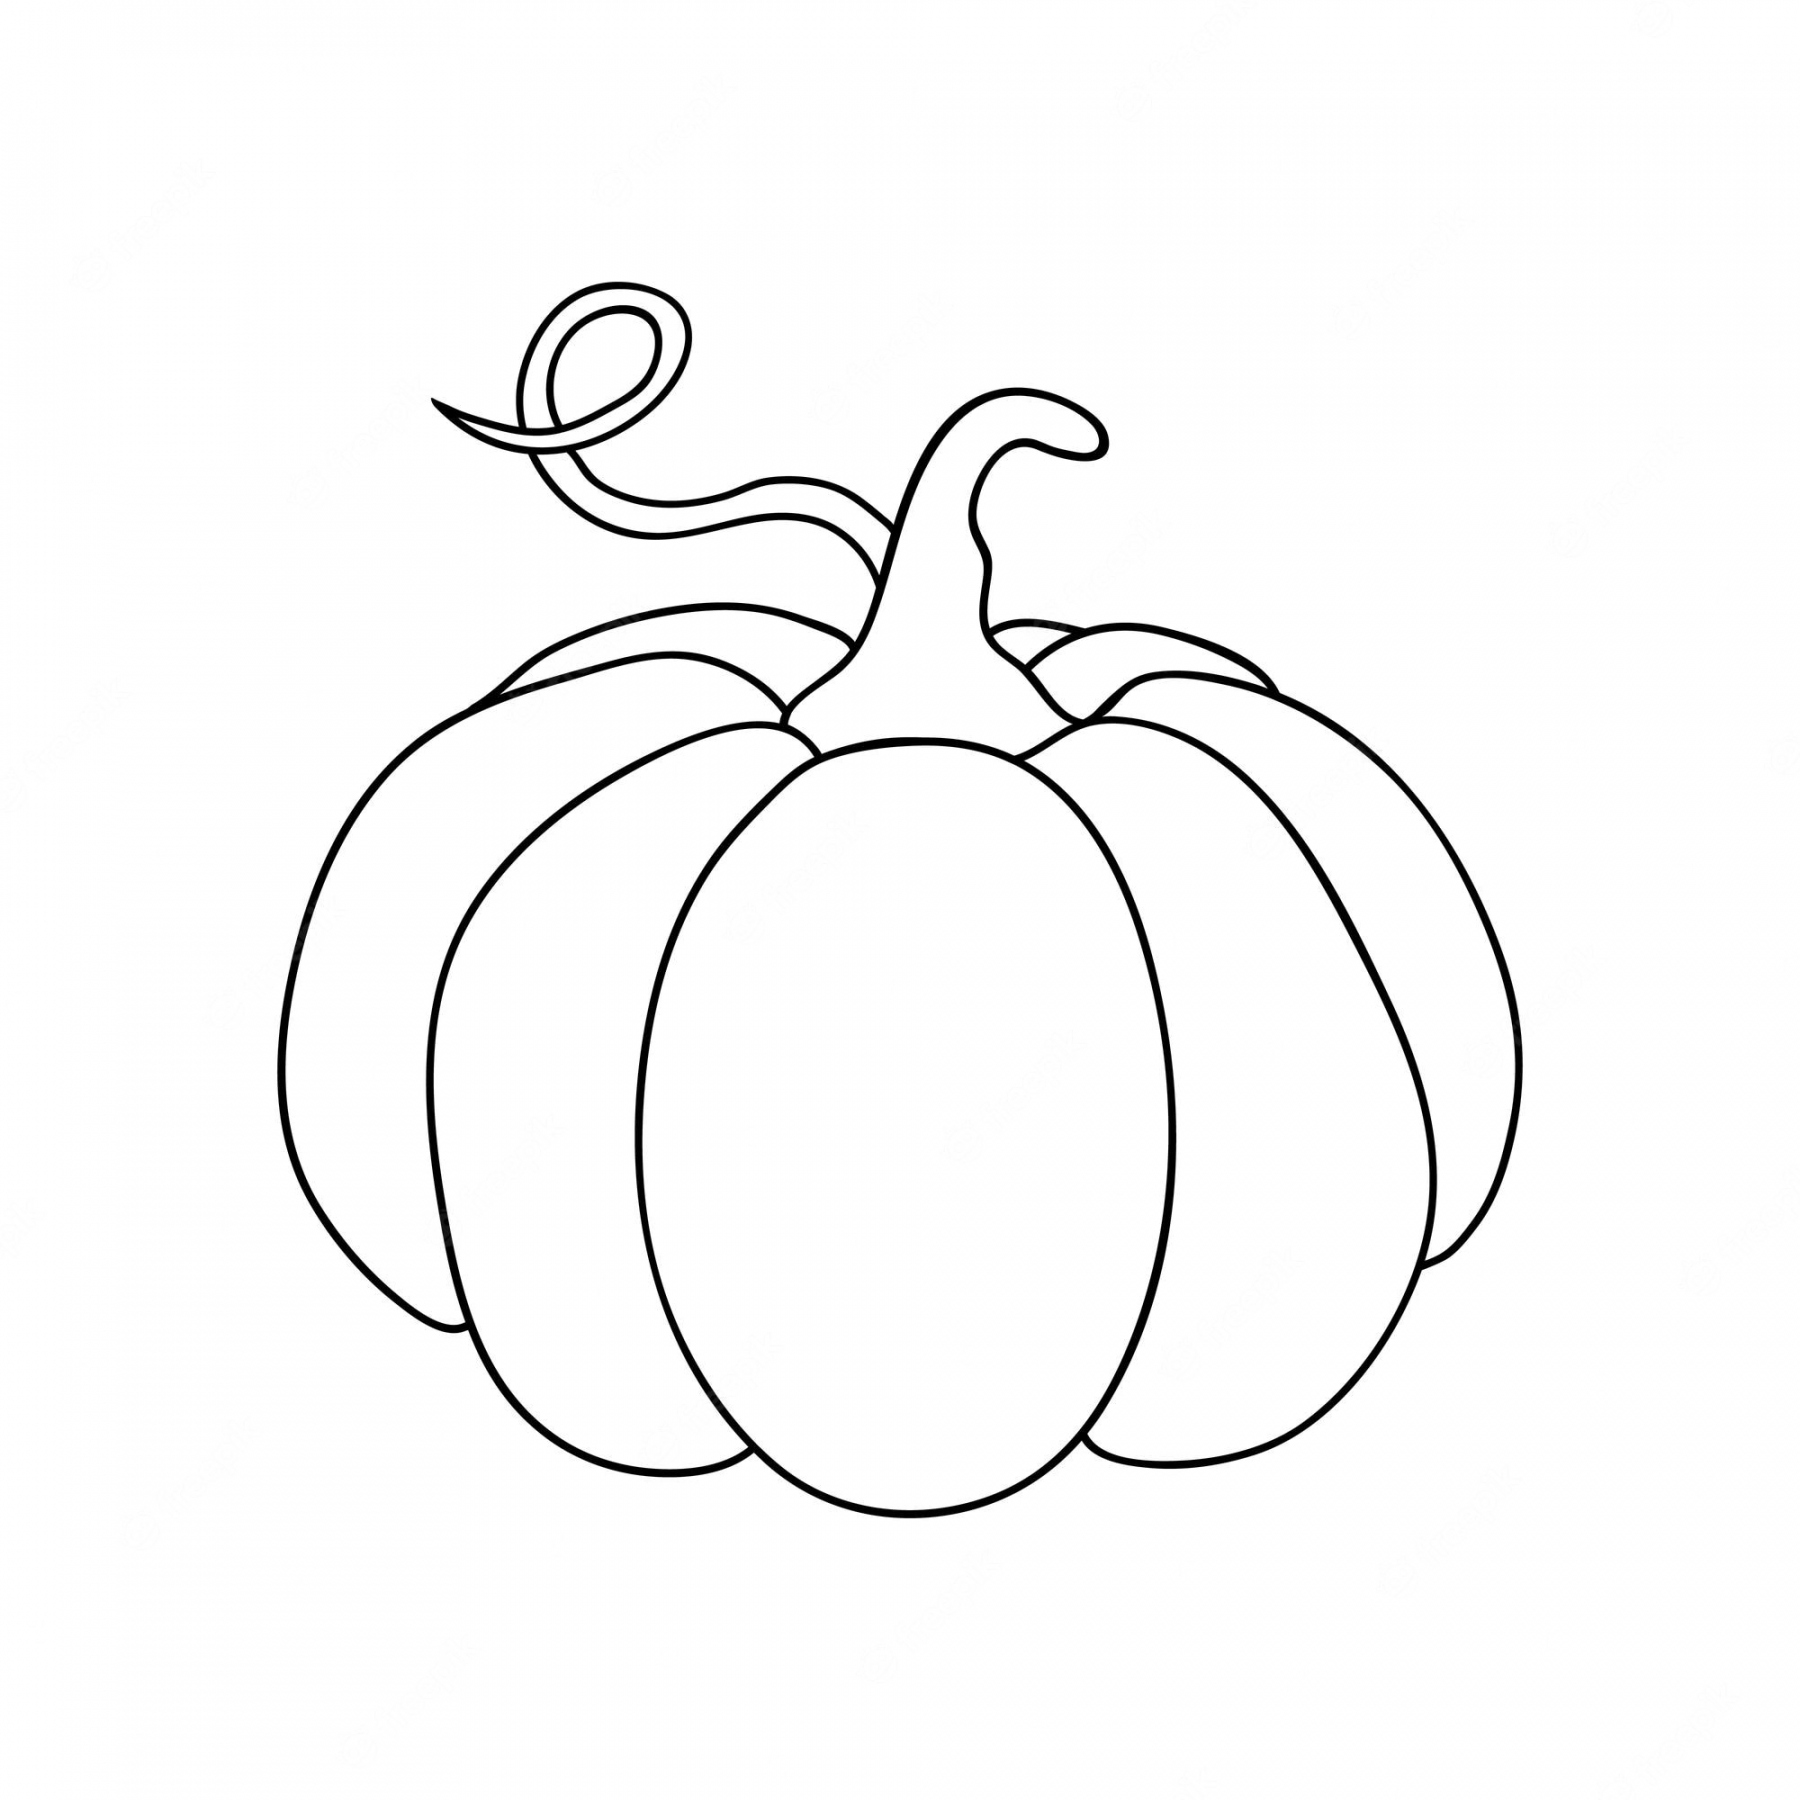 Premium Vector  Pumpkin icon outline in simple line drawings  - FREE Printables - Outline Of A Pumpkin